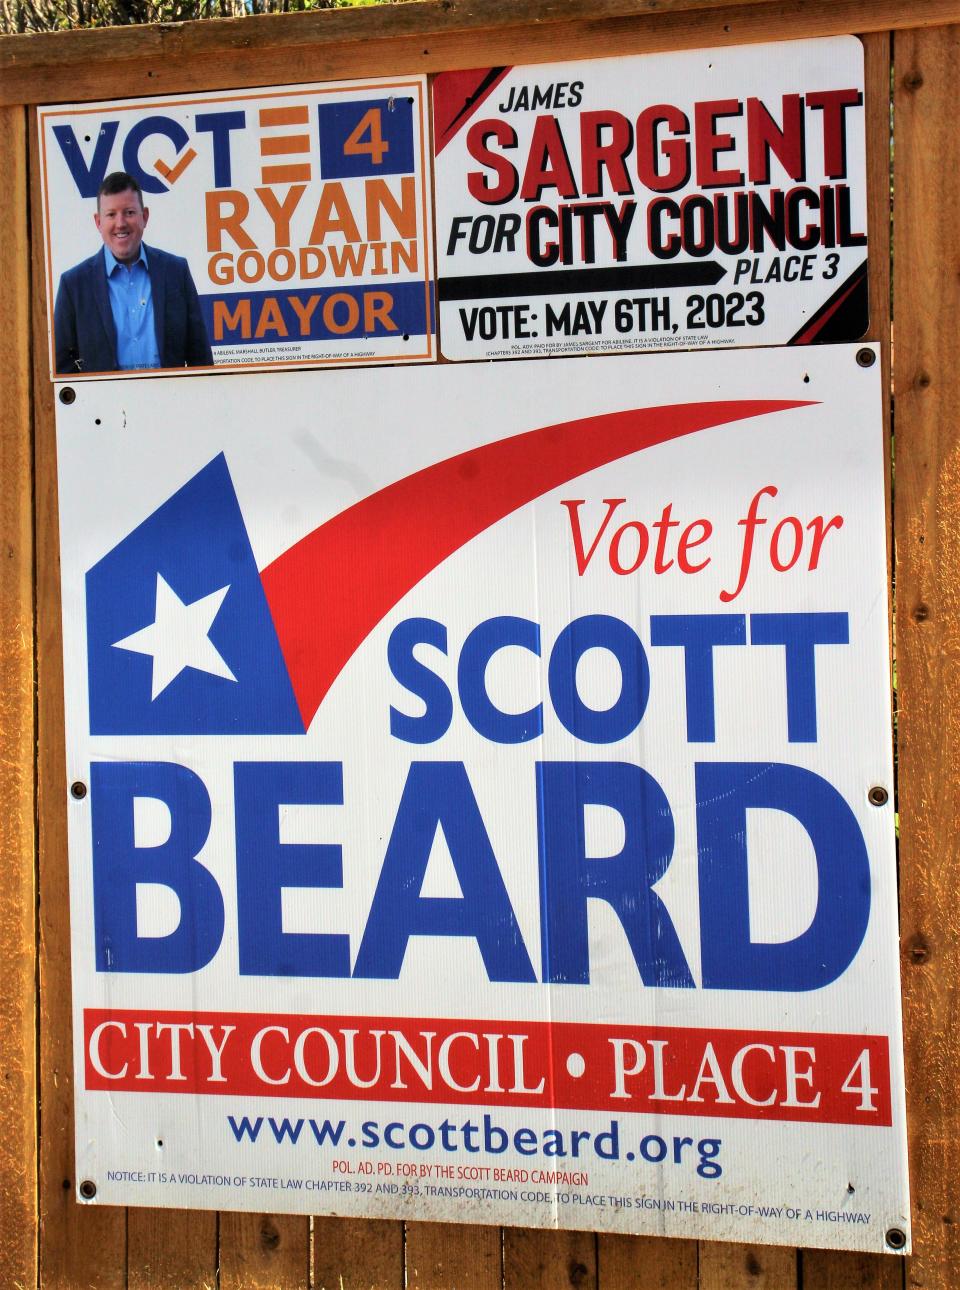 Campaign signs for Ryan Goodwin, James Sargent and Scott Beard are affixed to a fence at a home in southwest Abilene.